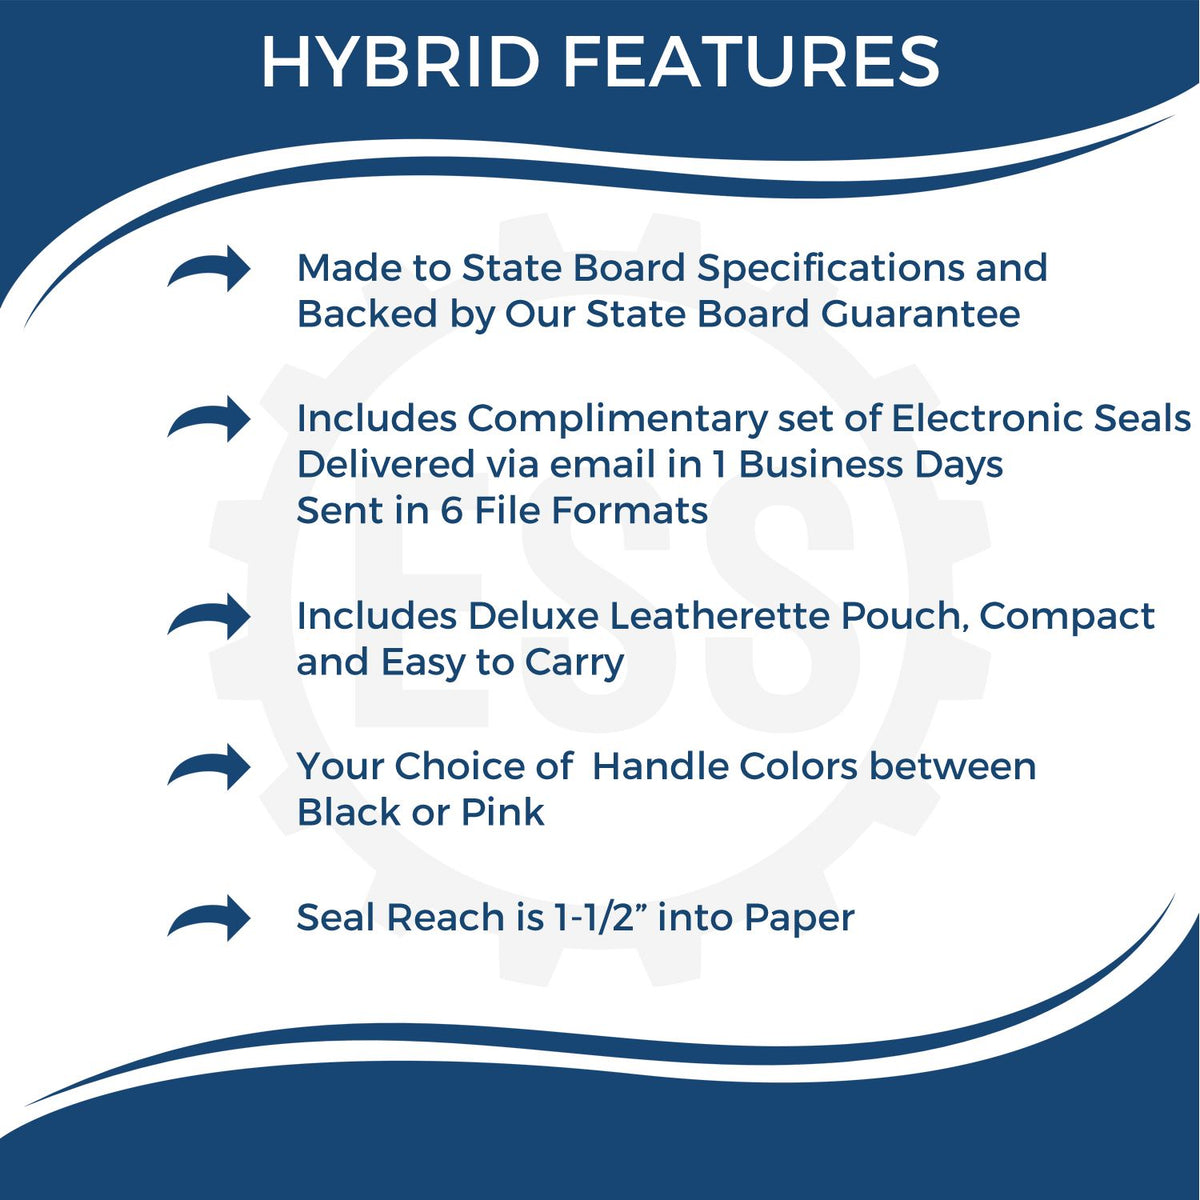 A picture of an infographic highlighting the selling points for the Hybrid Florida Engineer Seal